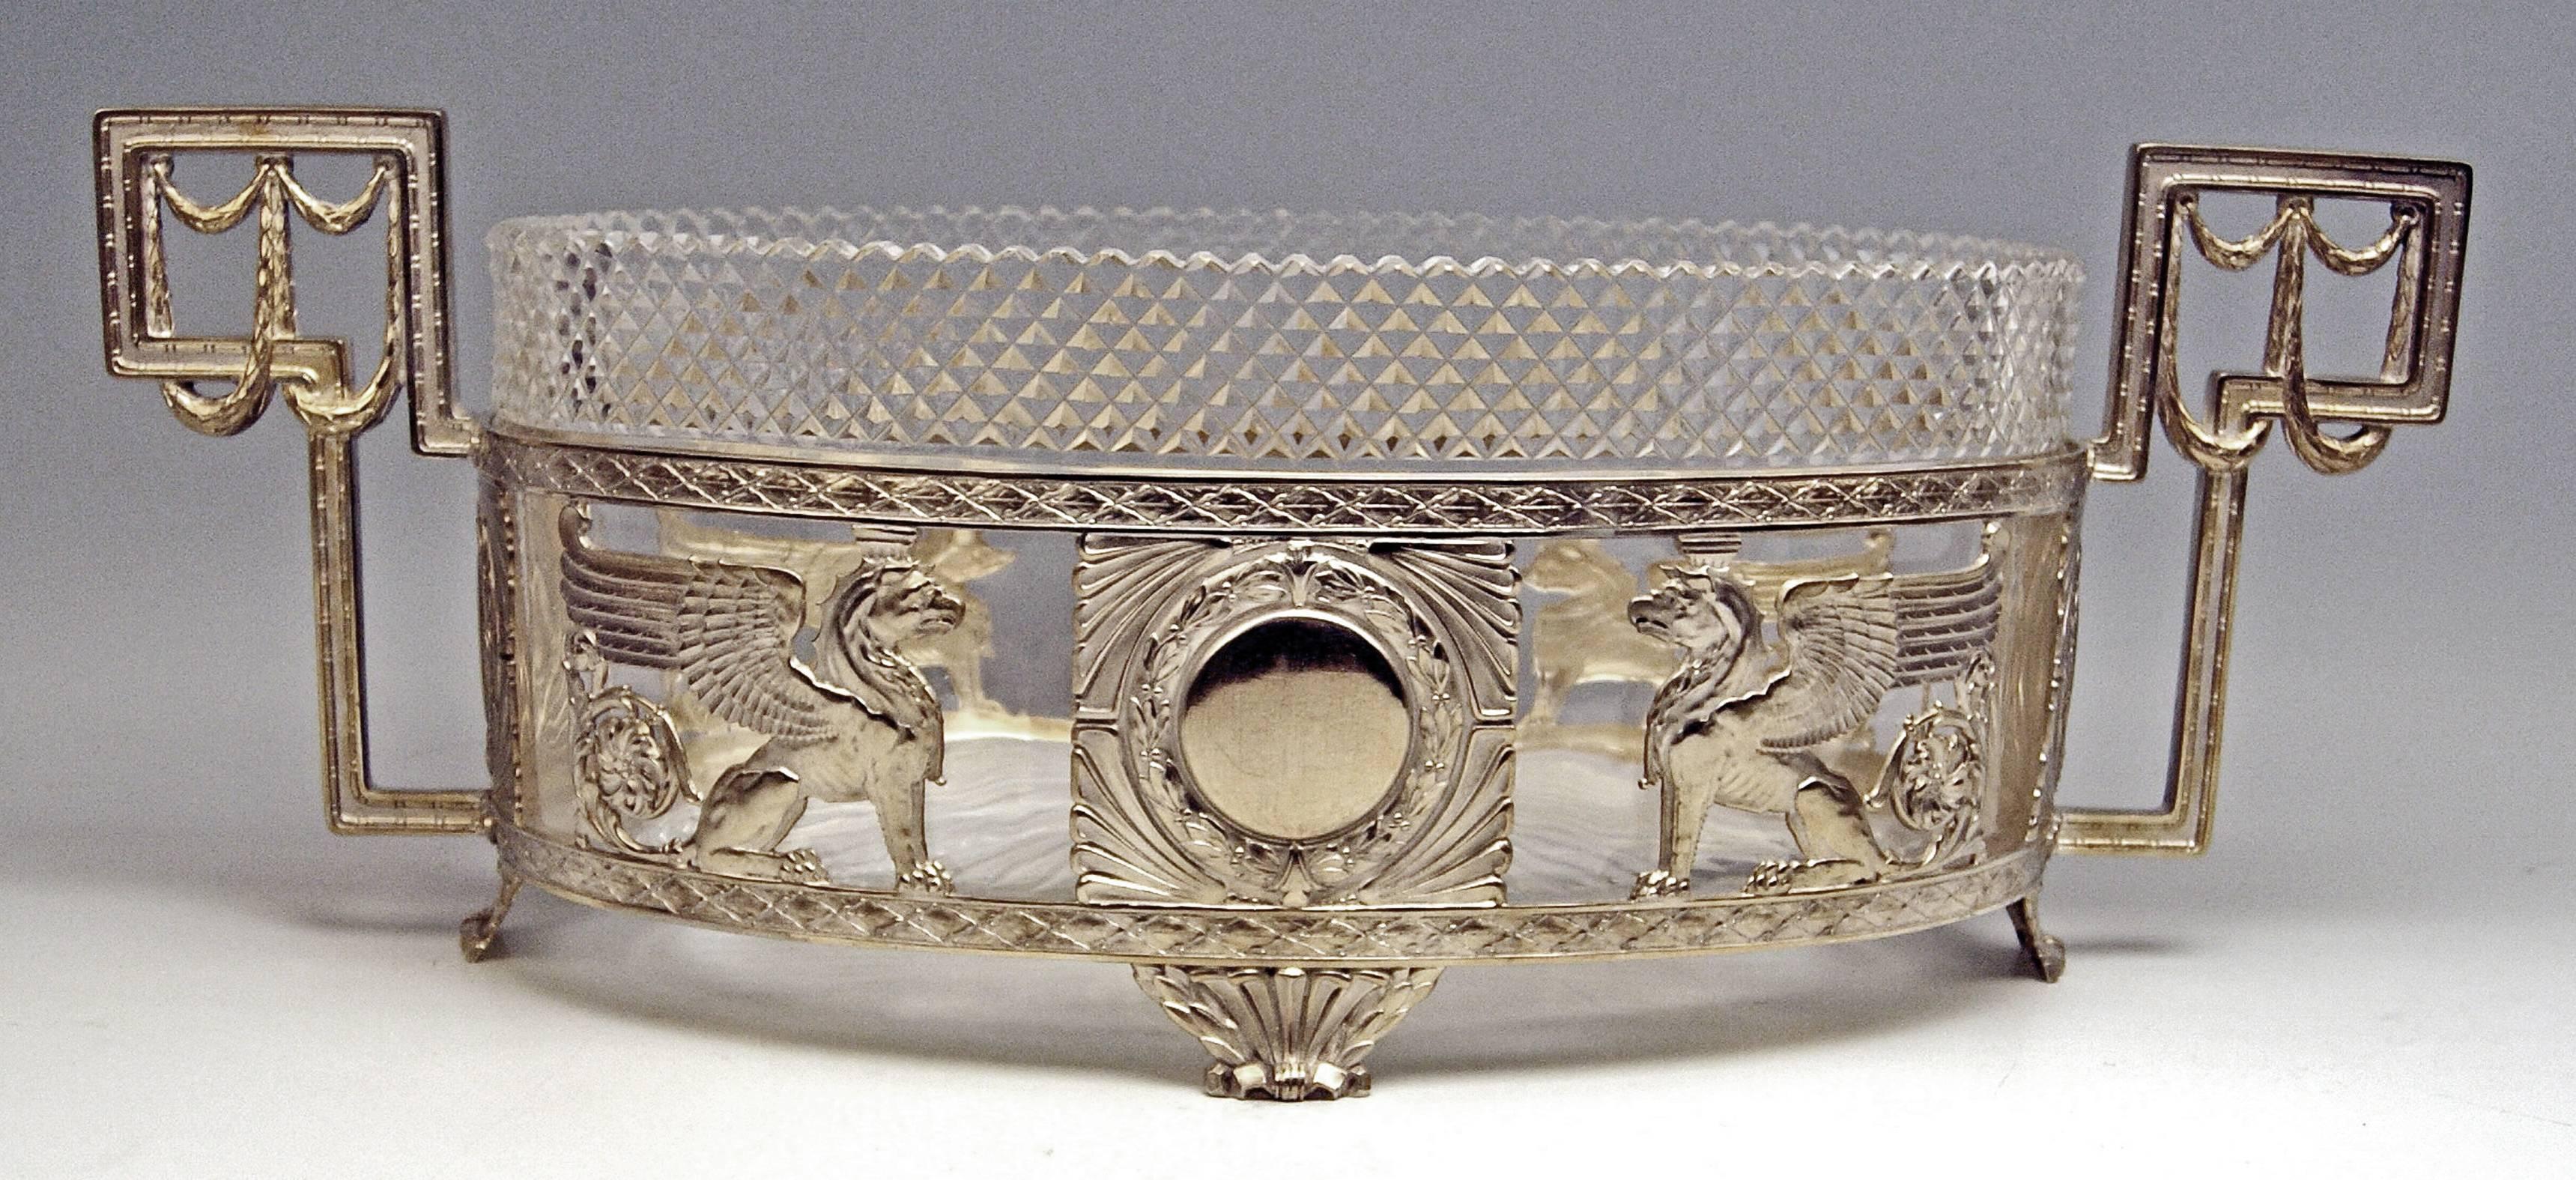 Silver 800 German guge flower bowl or centrepiece with original gorgeous glass liner
width: 52.5 cm (= 20.66 inches)!

Art Nouveau (made circa 1890)
Silver 800
Branded by German Crescent with Crown
Manufactory mark: 
KOCH & BERGFELD, Bremen